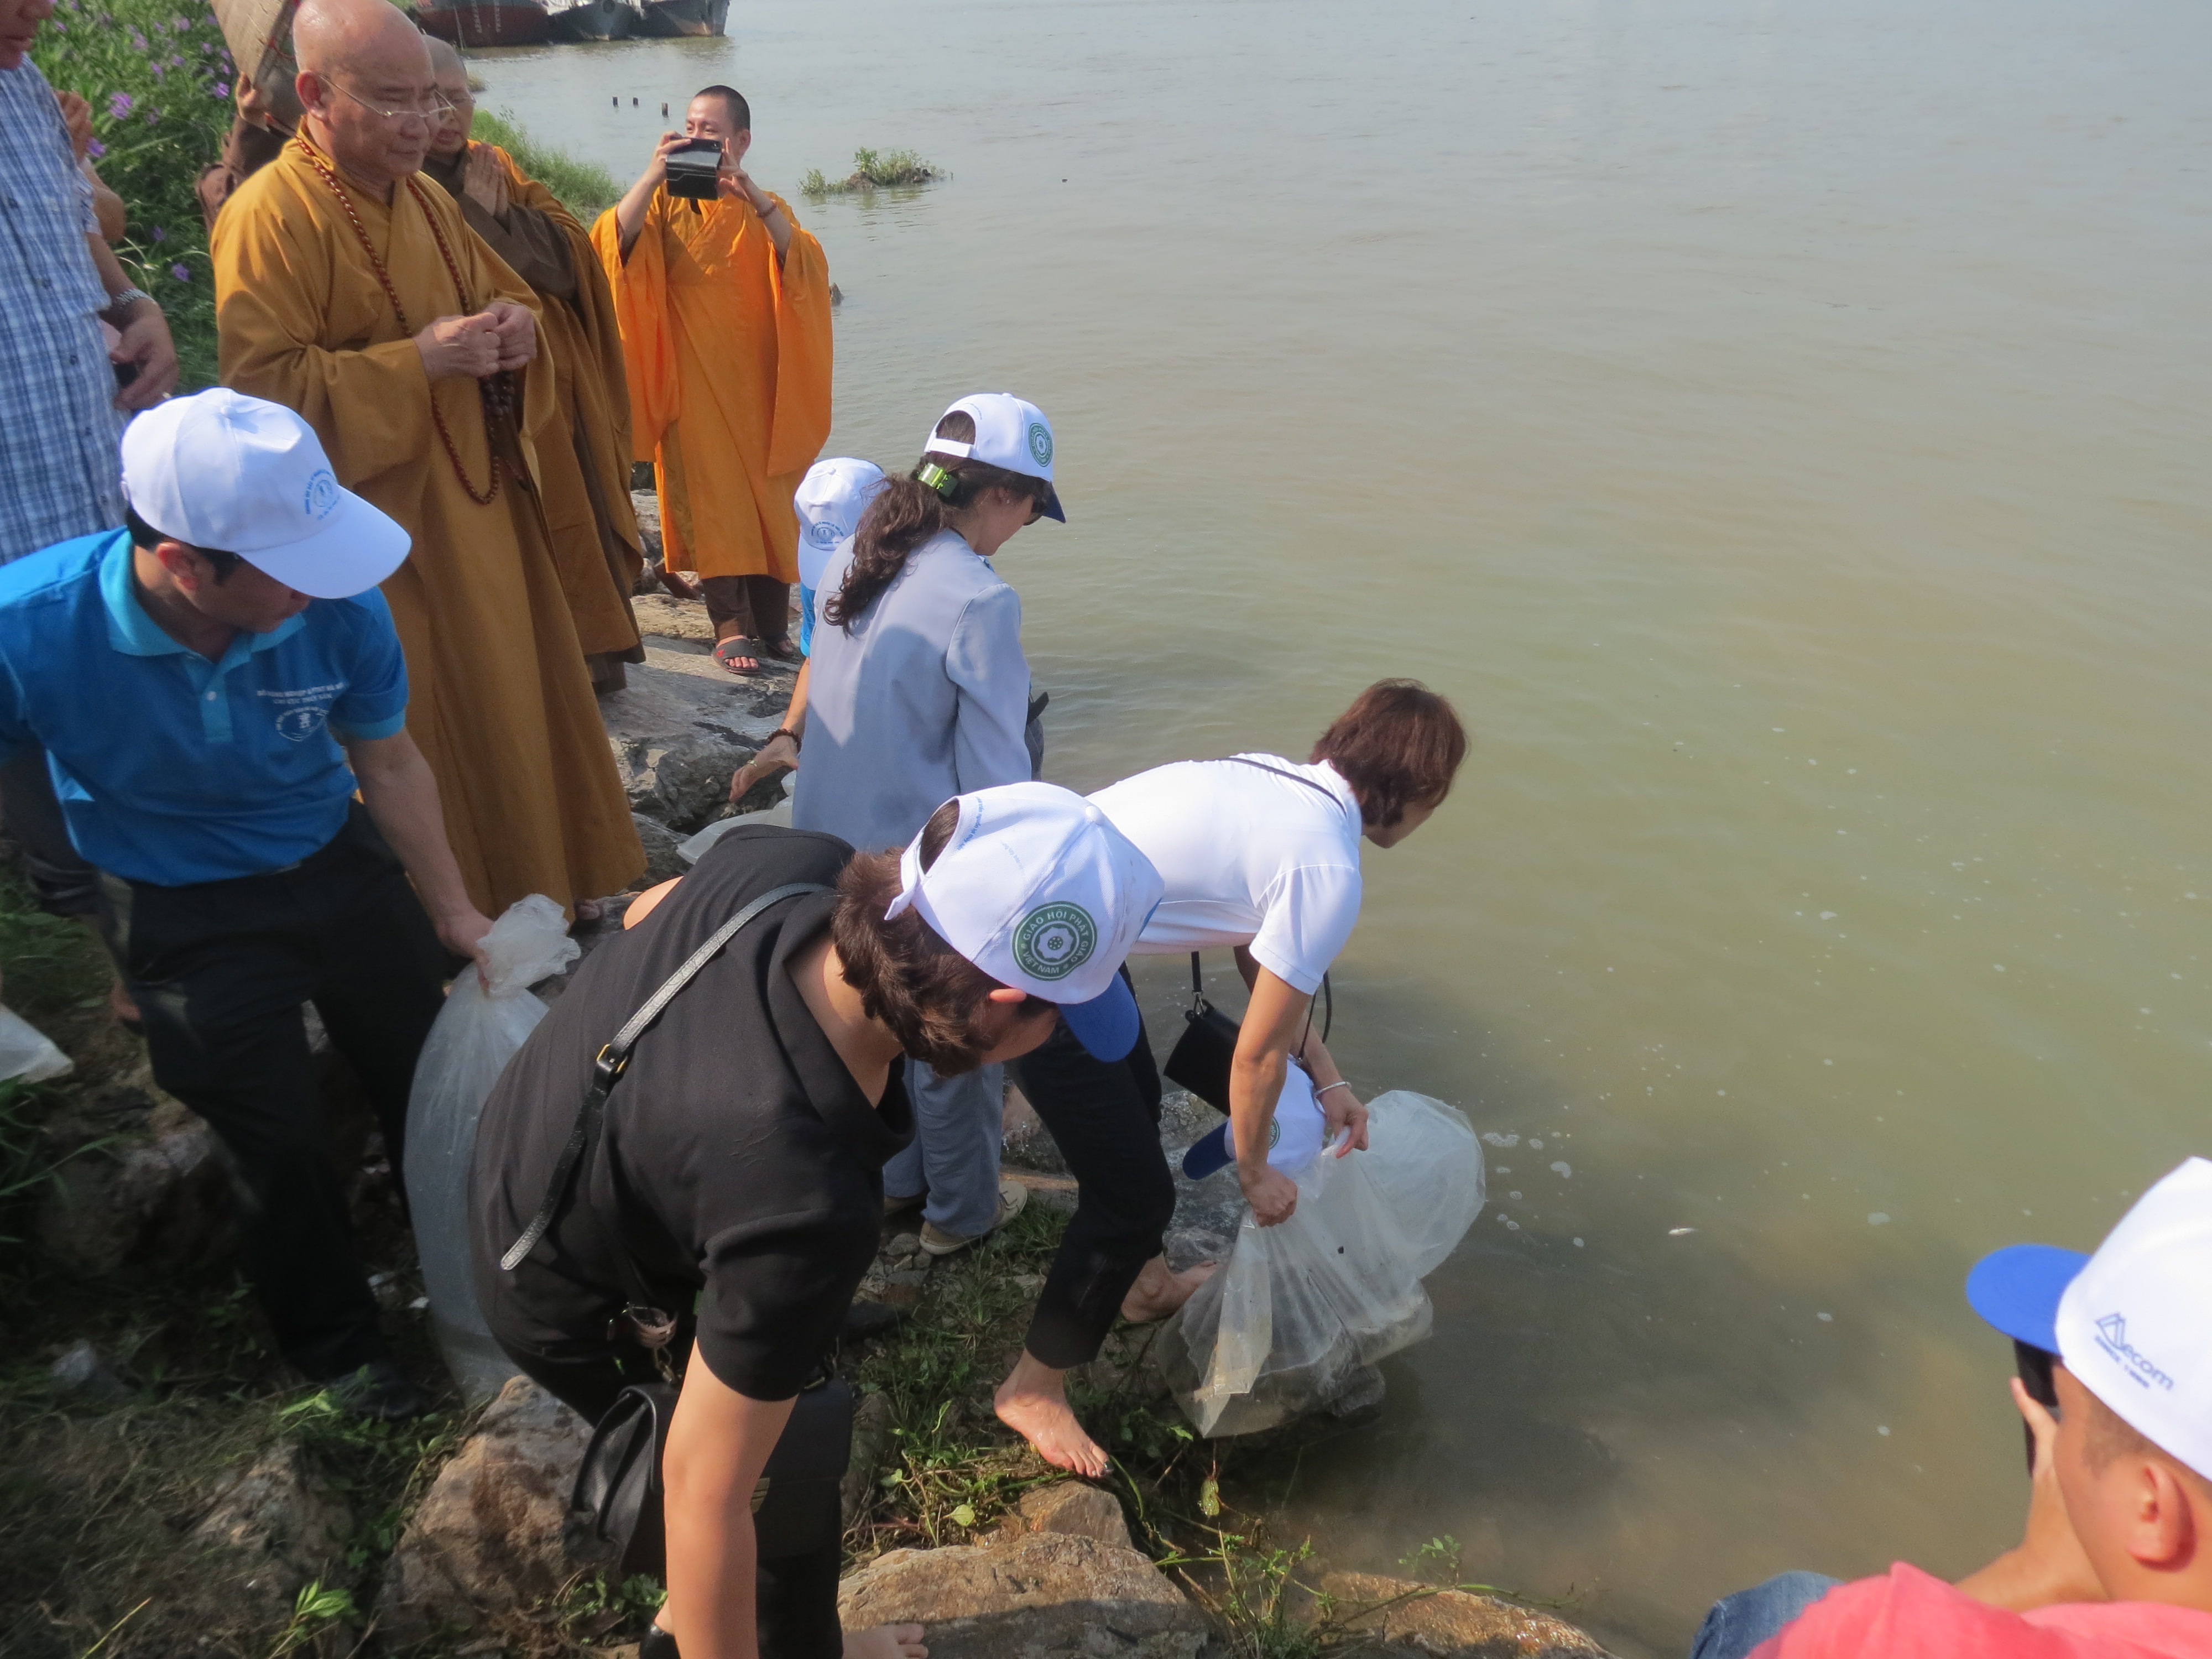 Fish release ceremony and reproduction of aquatic resources on the occasion of Vesak 2019